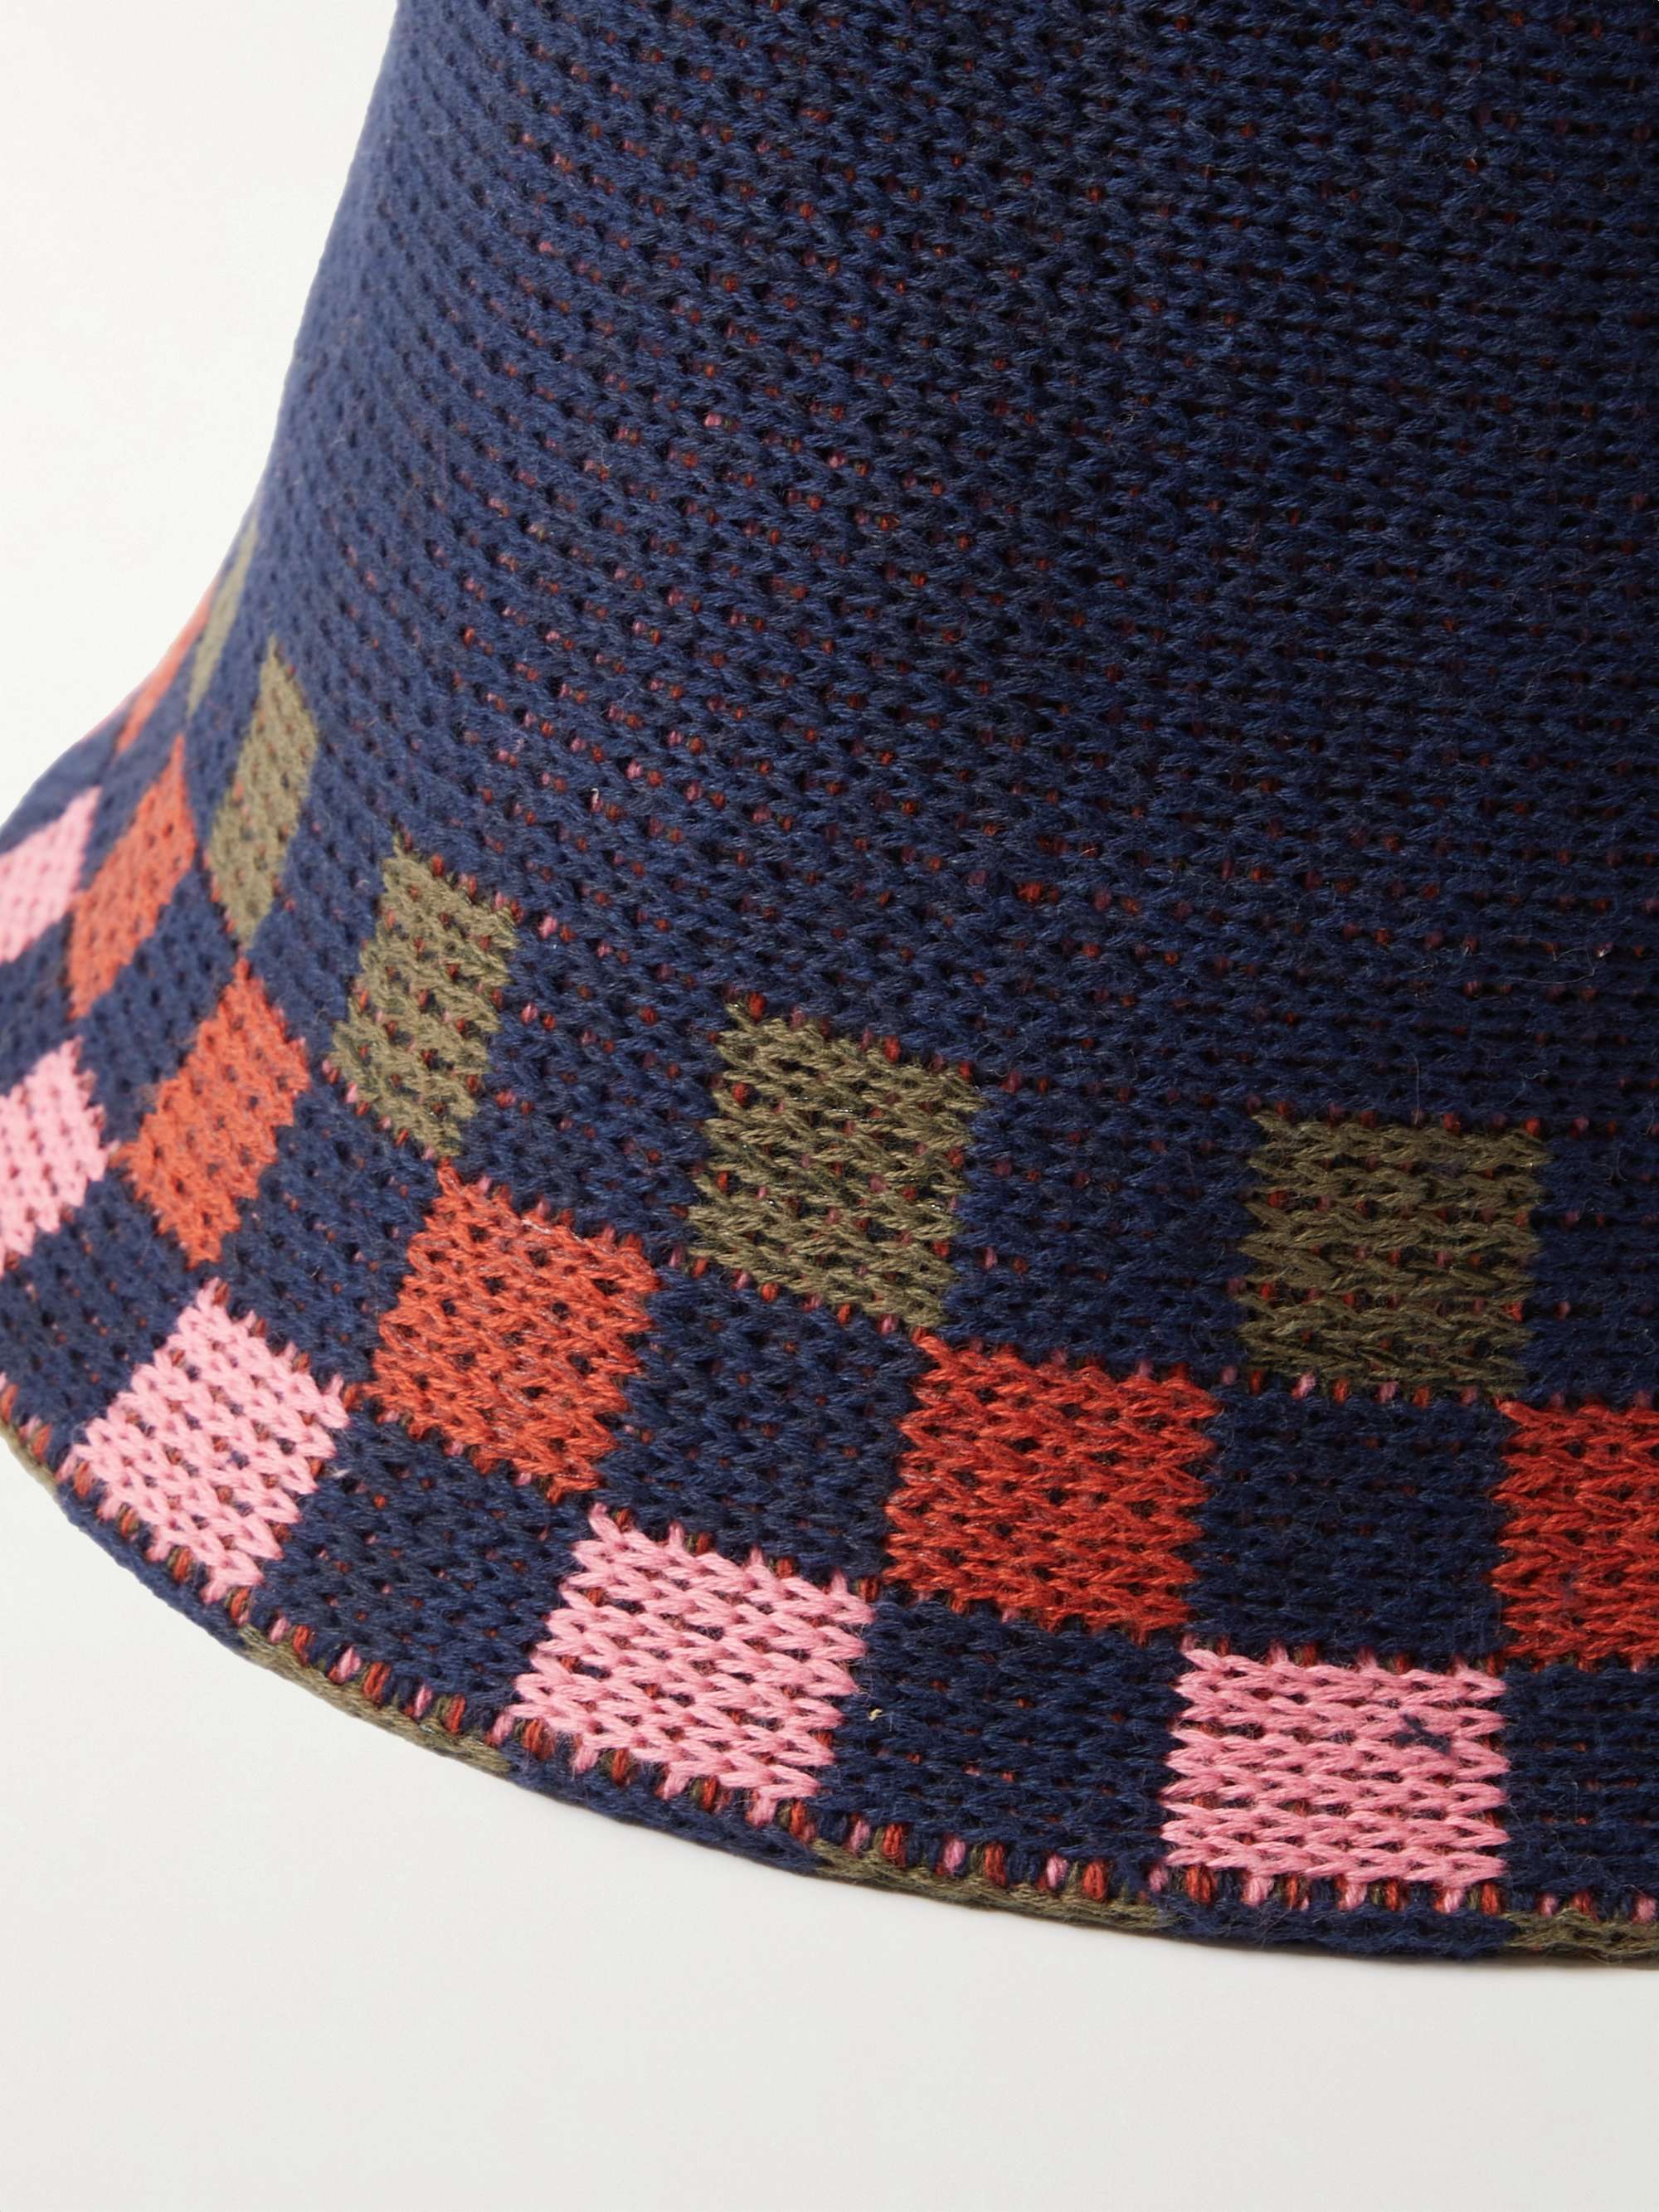 PAUL SMITH Checked Crocheted Bucket Hat